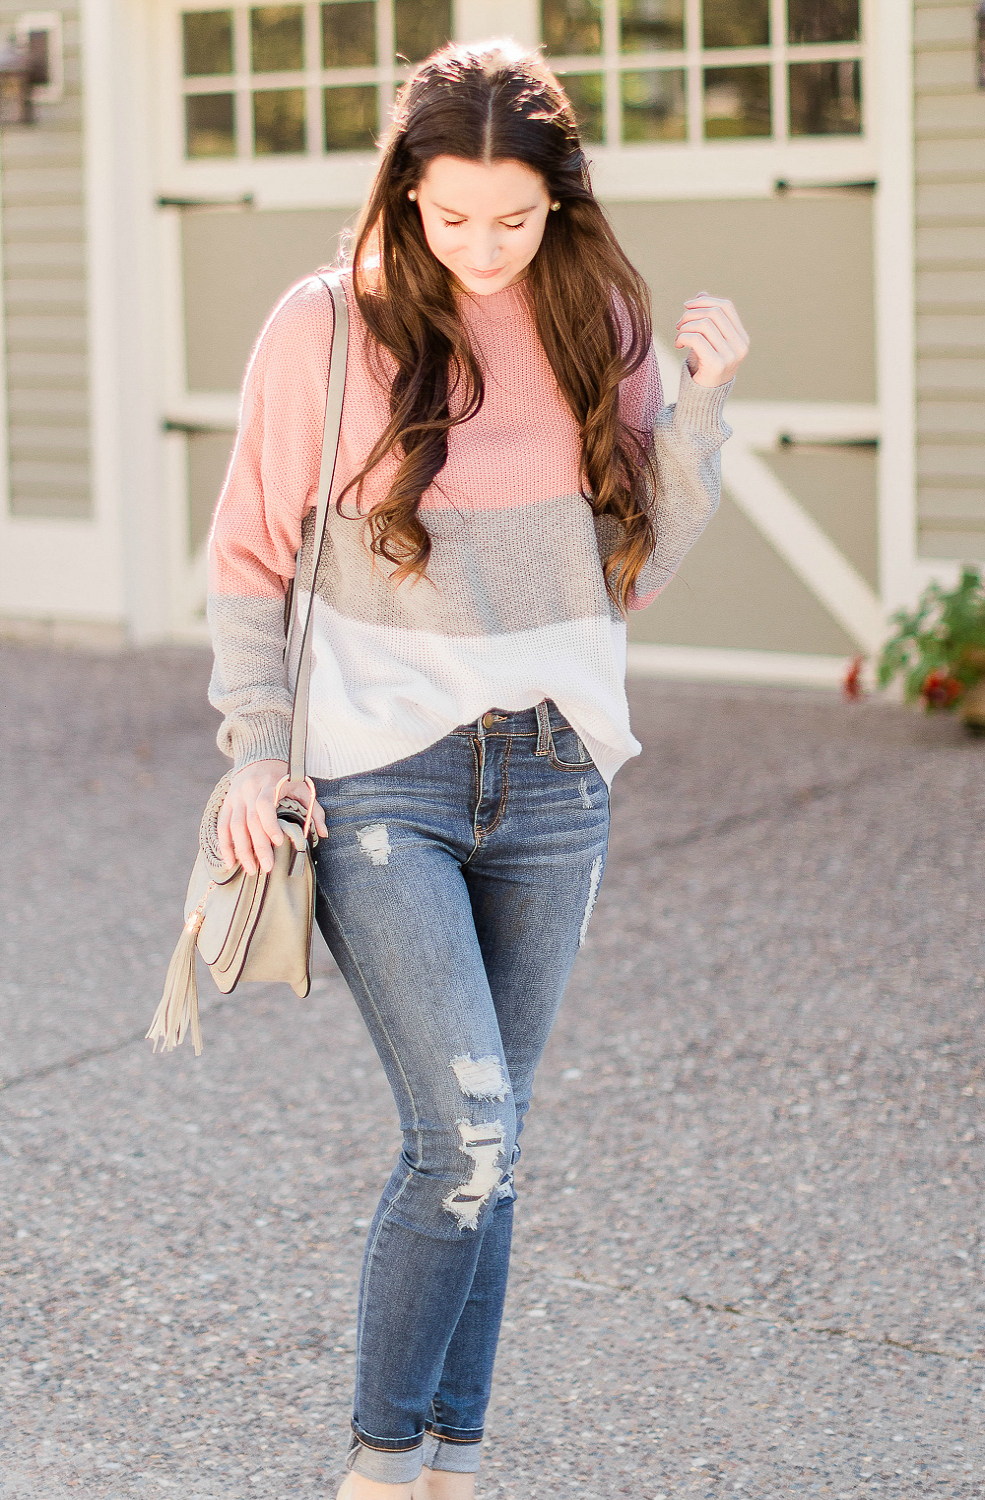 neutral color block sweater outfit by affordable fashion blogger Stephanie Ziajka from Diary of a Debutante, Chloe Hudson dupe bag, Chloe Hudson designer dupe bag, Chloe dupe bag, Tom Clovers Saddle Crossbody, Liverpool Jeans review, distressed Liverpool Jeans